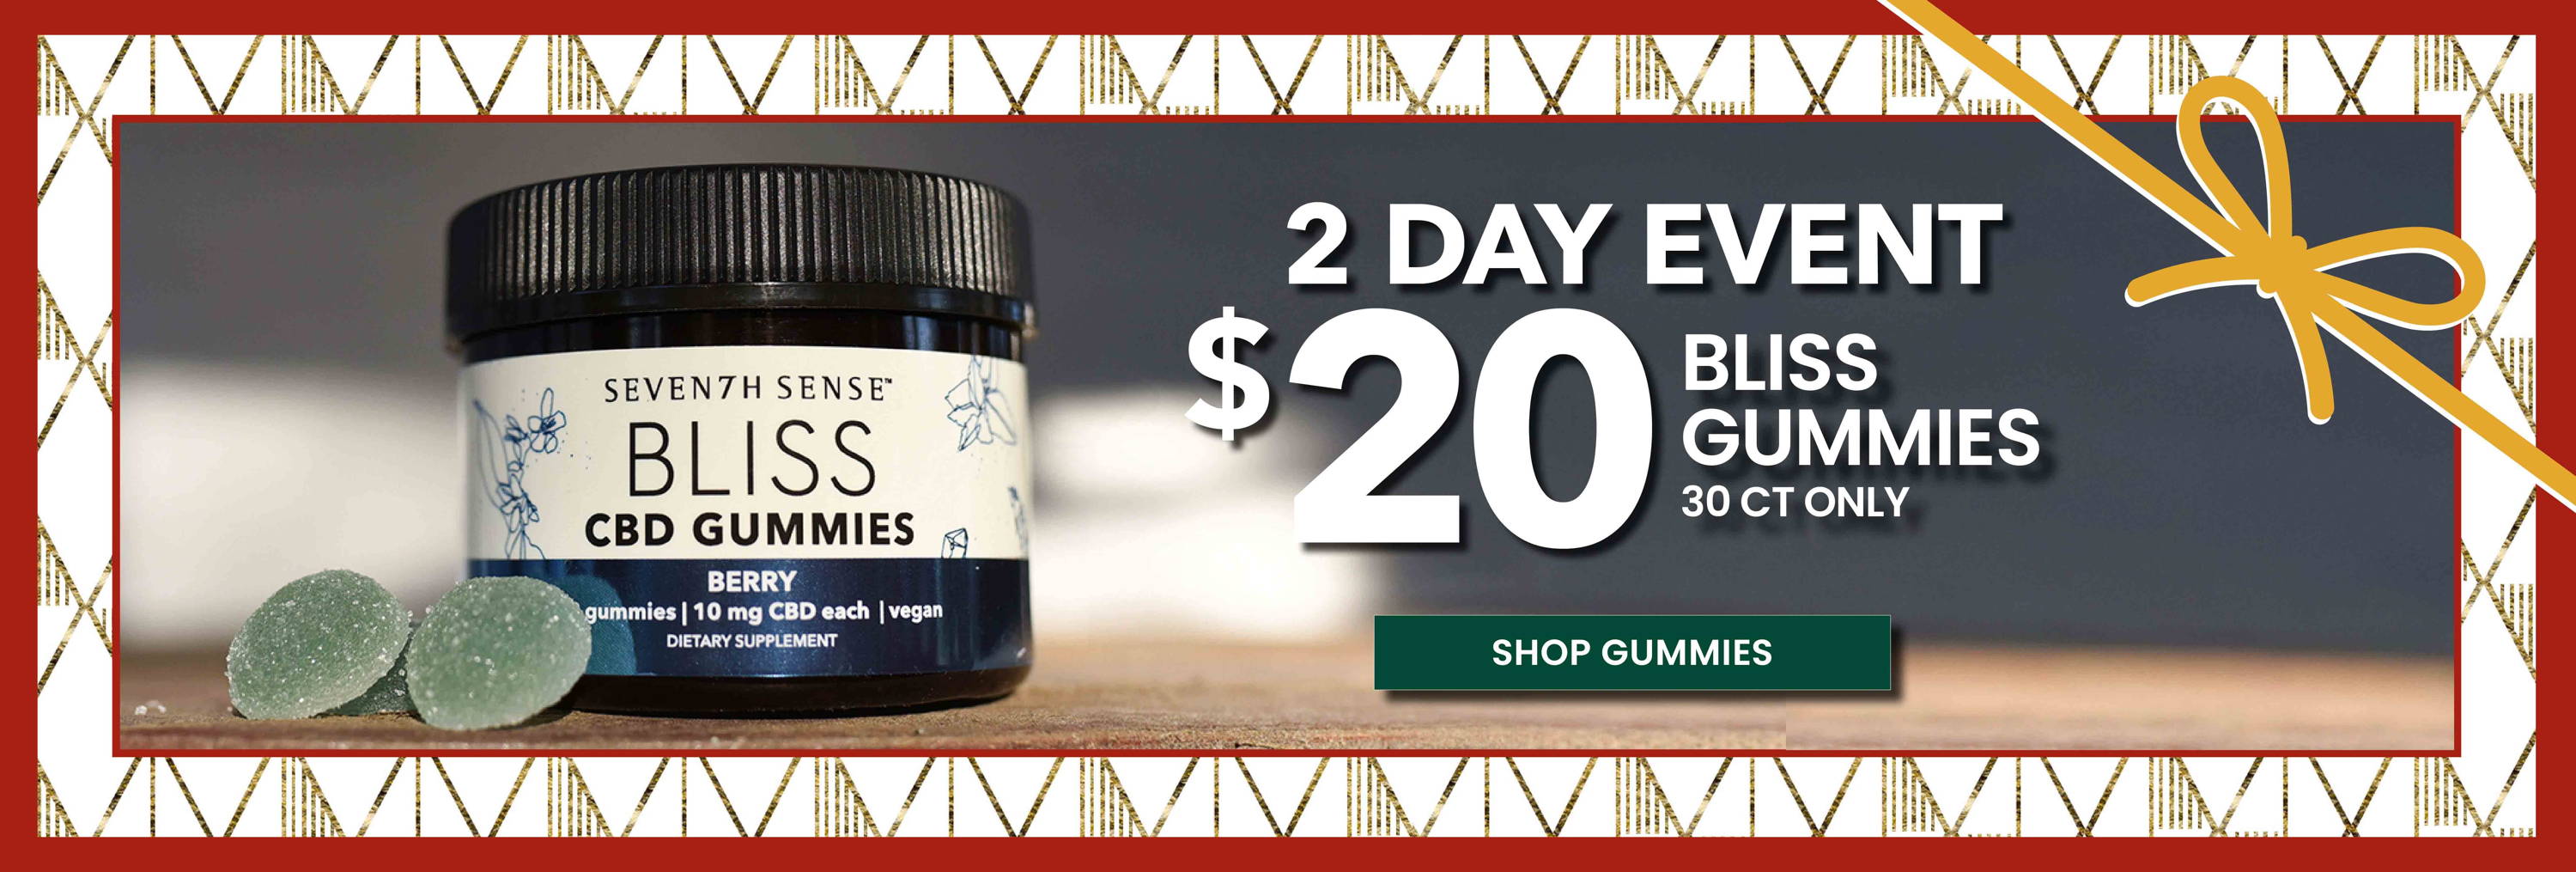 2 Day Event. $20 Bliss Gummies. 30 ct Only. Shop Gummies.